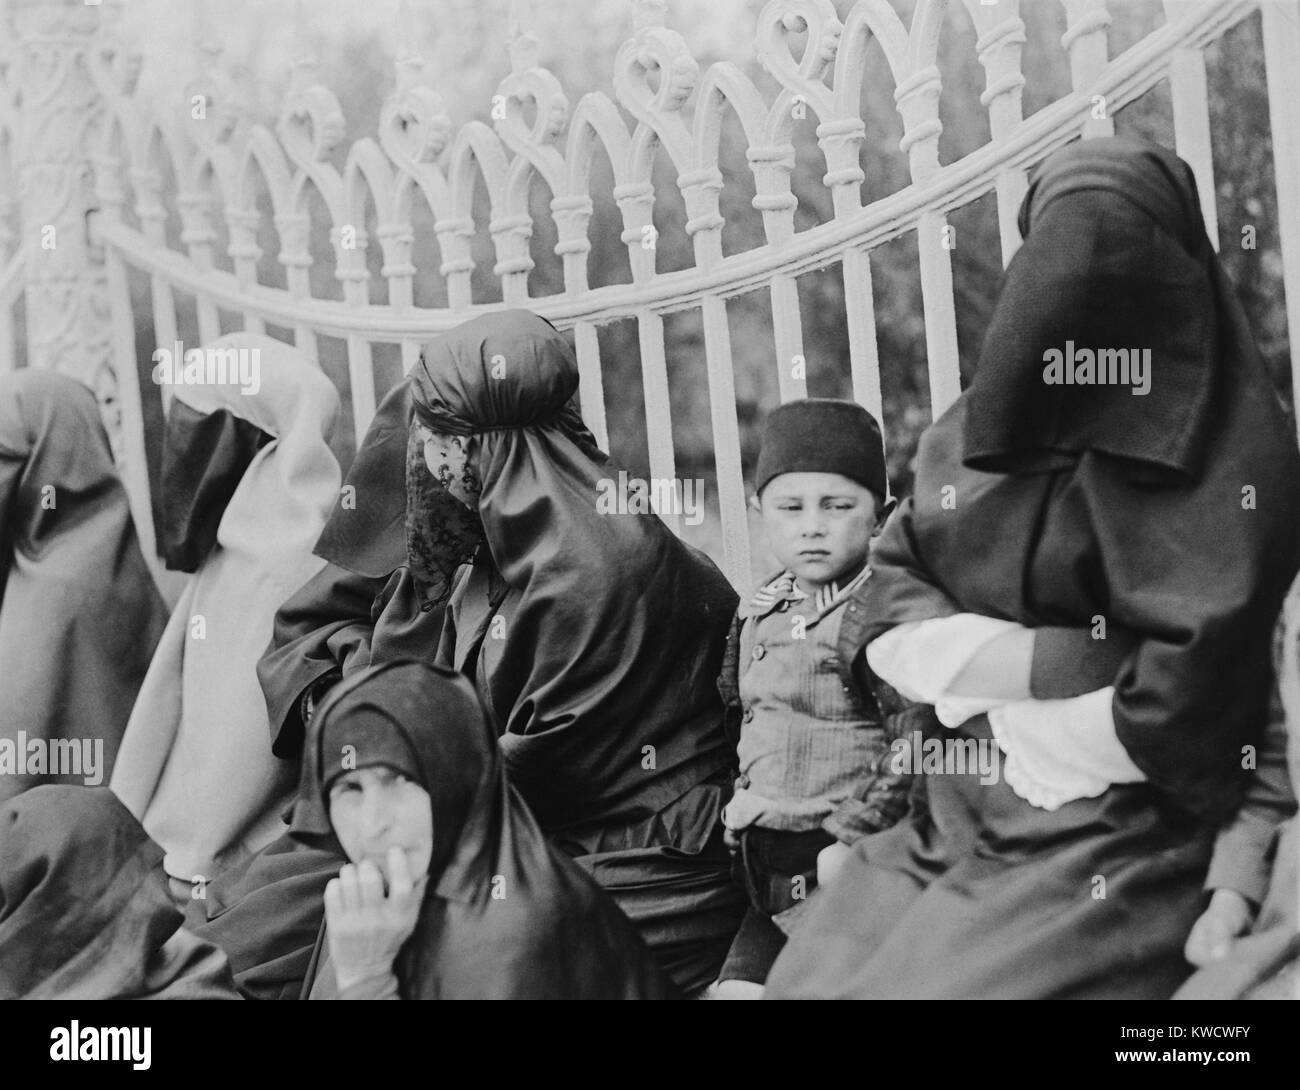 Veiled Islamic women in Constantinople in 1919. In the 1920s, the new Turkish leader, Kemal Ataturk, allowed women the freedom to wear modern clothing (BSLOC 2017 1 116) Stock Photo